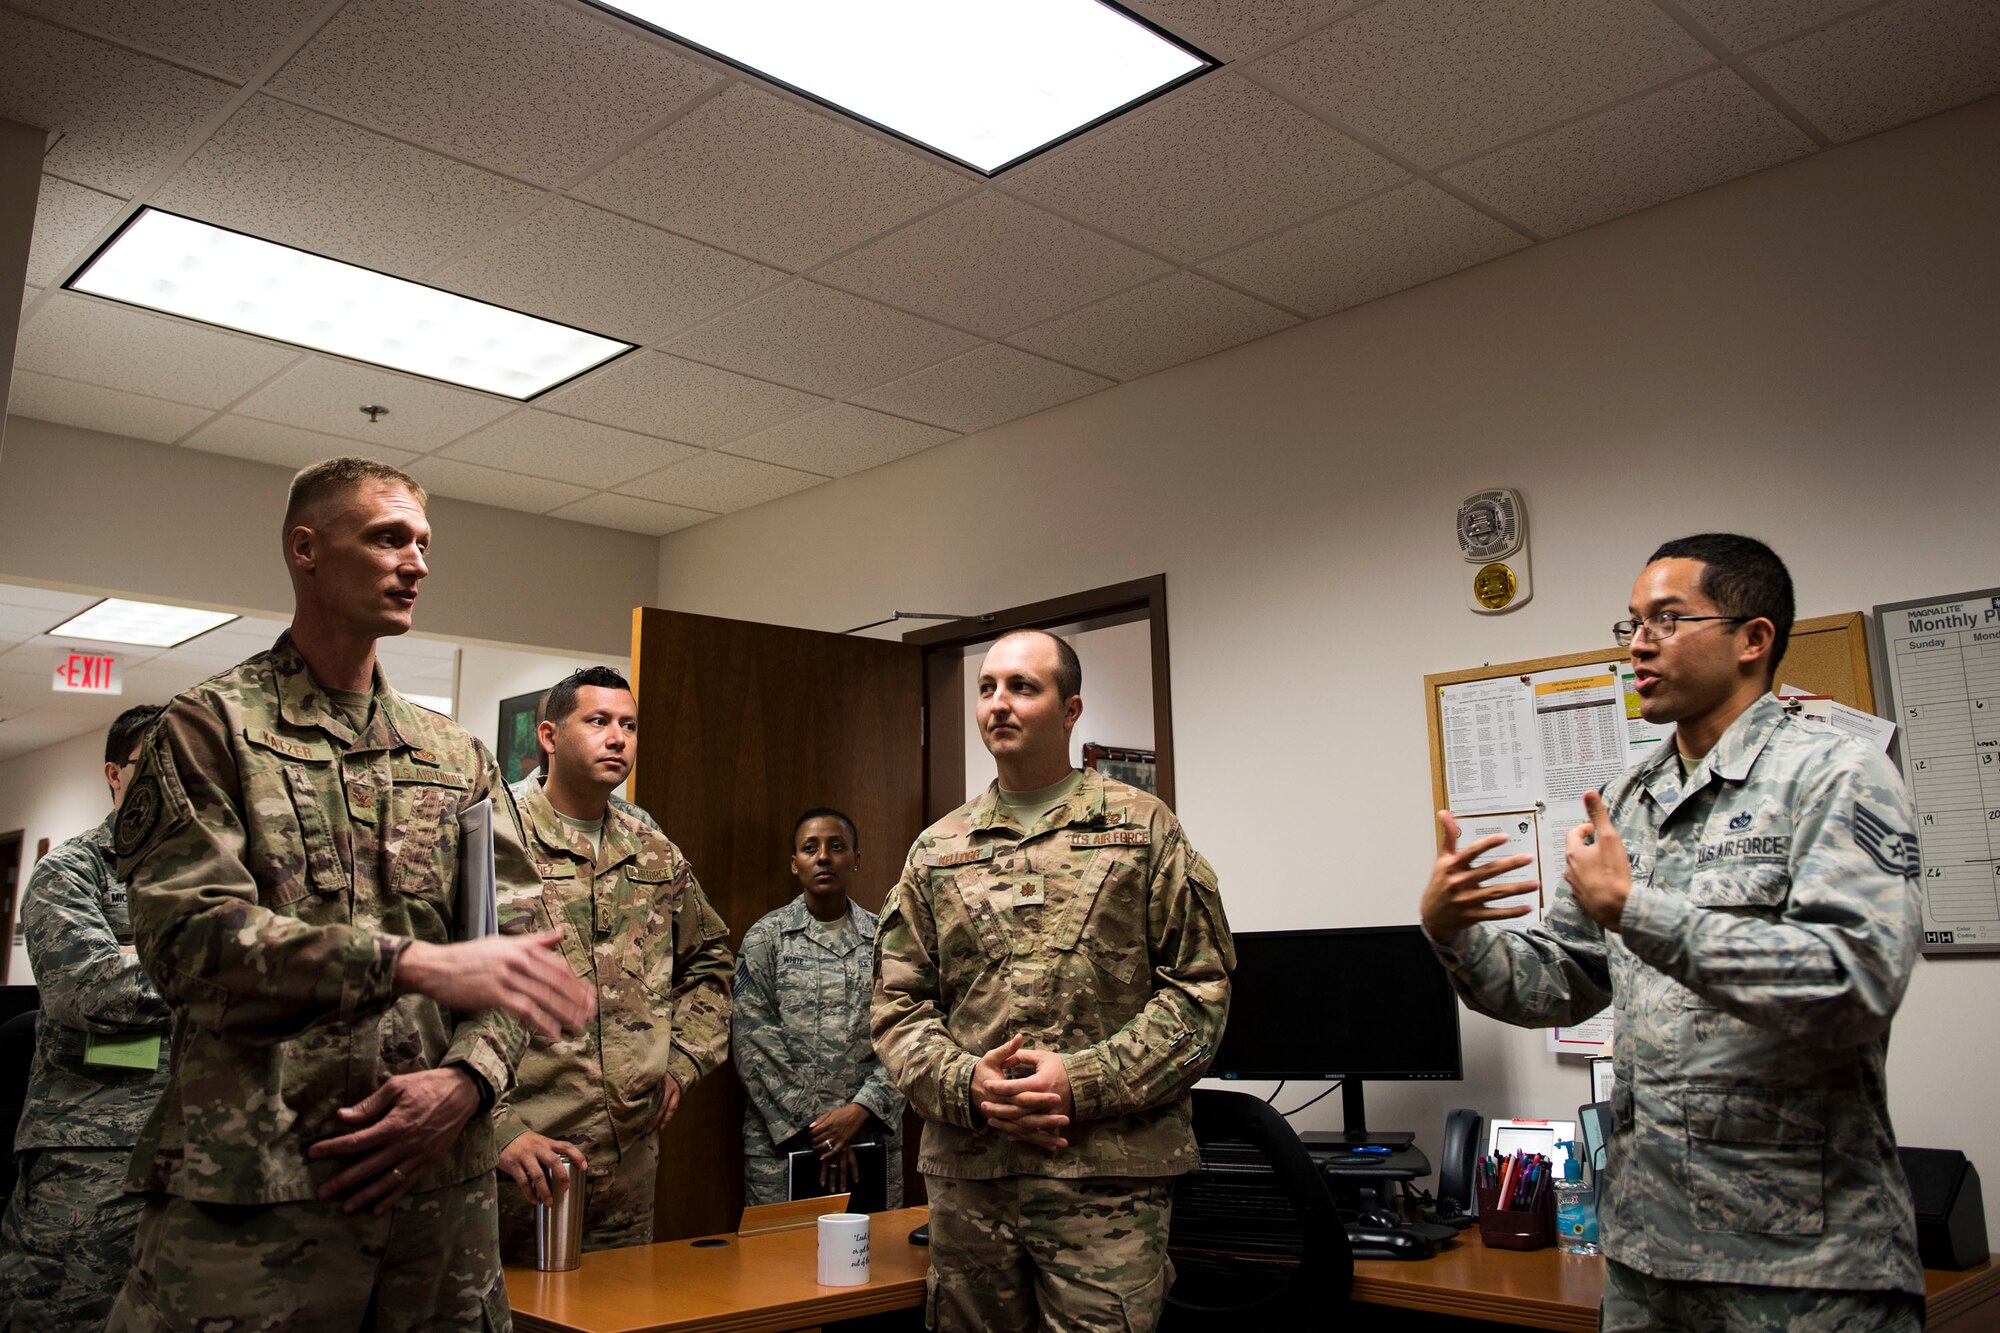 Staff Sgt. Luis Lopez, right, 23d Civil Engineer Squadron (CES) NCO in charge of customer service, briefs Col. Dee Jay Katzer, left, command engineer for Air Combat Command (ACC), during a squadron tour, May 22, 2019, at Moody Air Force Base, Ga. Katzer’s first visit to Moody consisted of a base tour, along with visiting various 23d CES shops. He also observed Airmen from the 23d CES conduct airfield recovery training. “As COMACC’s Civil Engineer Division Chief, it’s important that Katzer understand the missions of the 23d Wing, 93d Air Ground Operations Wing and their mission partners that rely on Moody and Avon Park Air Force Range,” said Lt. Col. Michael Francis, 23d CES commander. “This allows Katzer and his staff to better advocate for the engineering and facility requirements needed to enable the 23d CES’s operational missions here.” (U.S. Air Force photo by Senior Airman Erick Requadt)